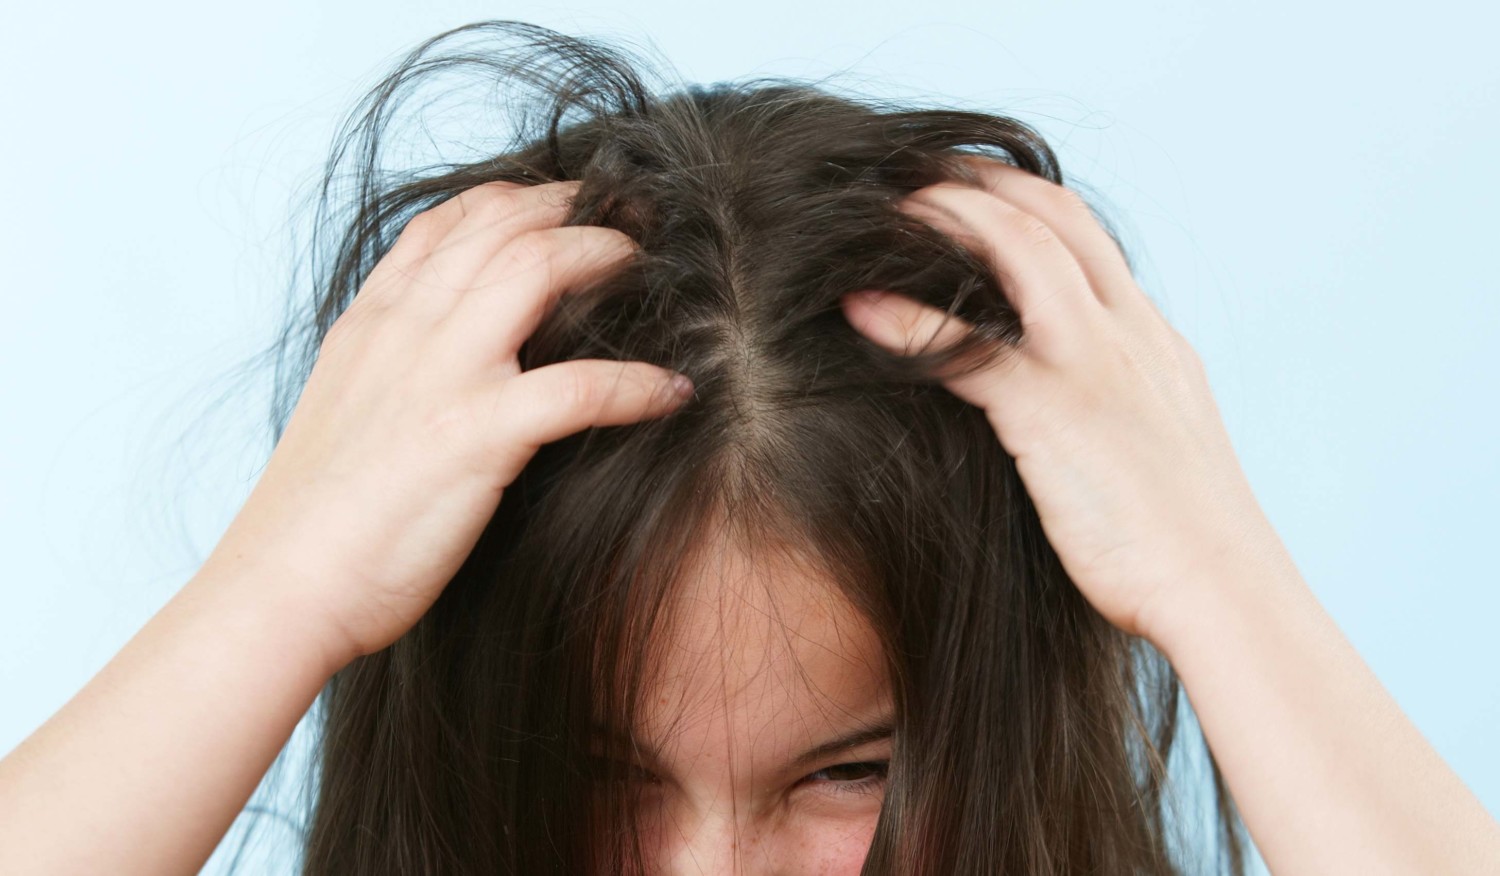 Effectively Get Rid Of Super Lice Without Chemicals